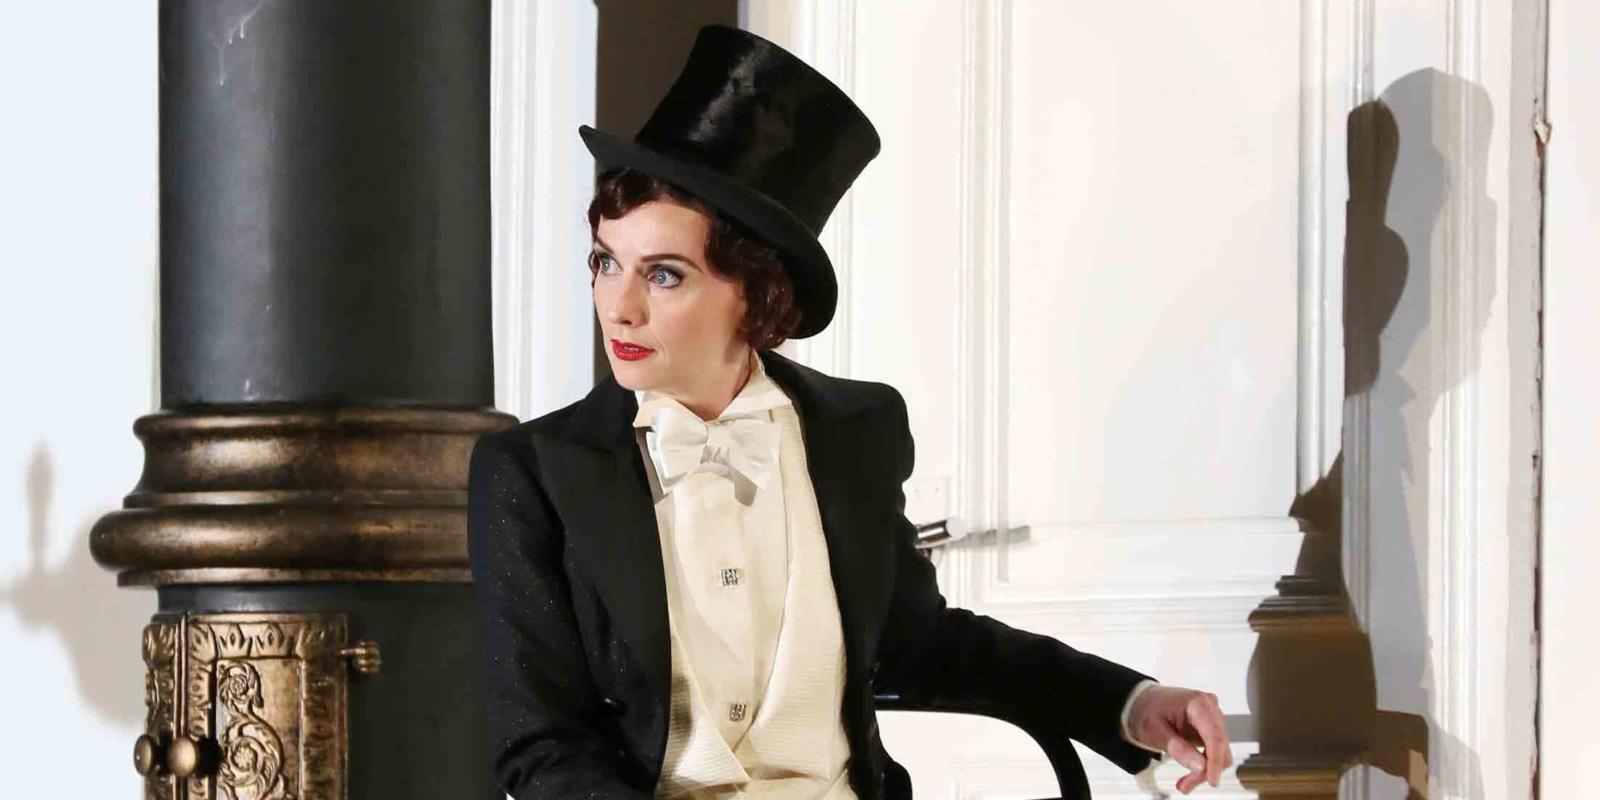 a women sat on a chair in a full suit and top hat